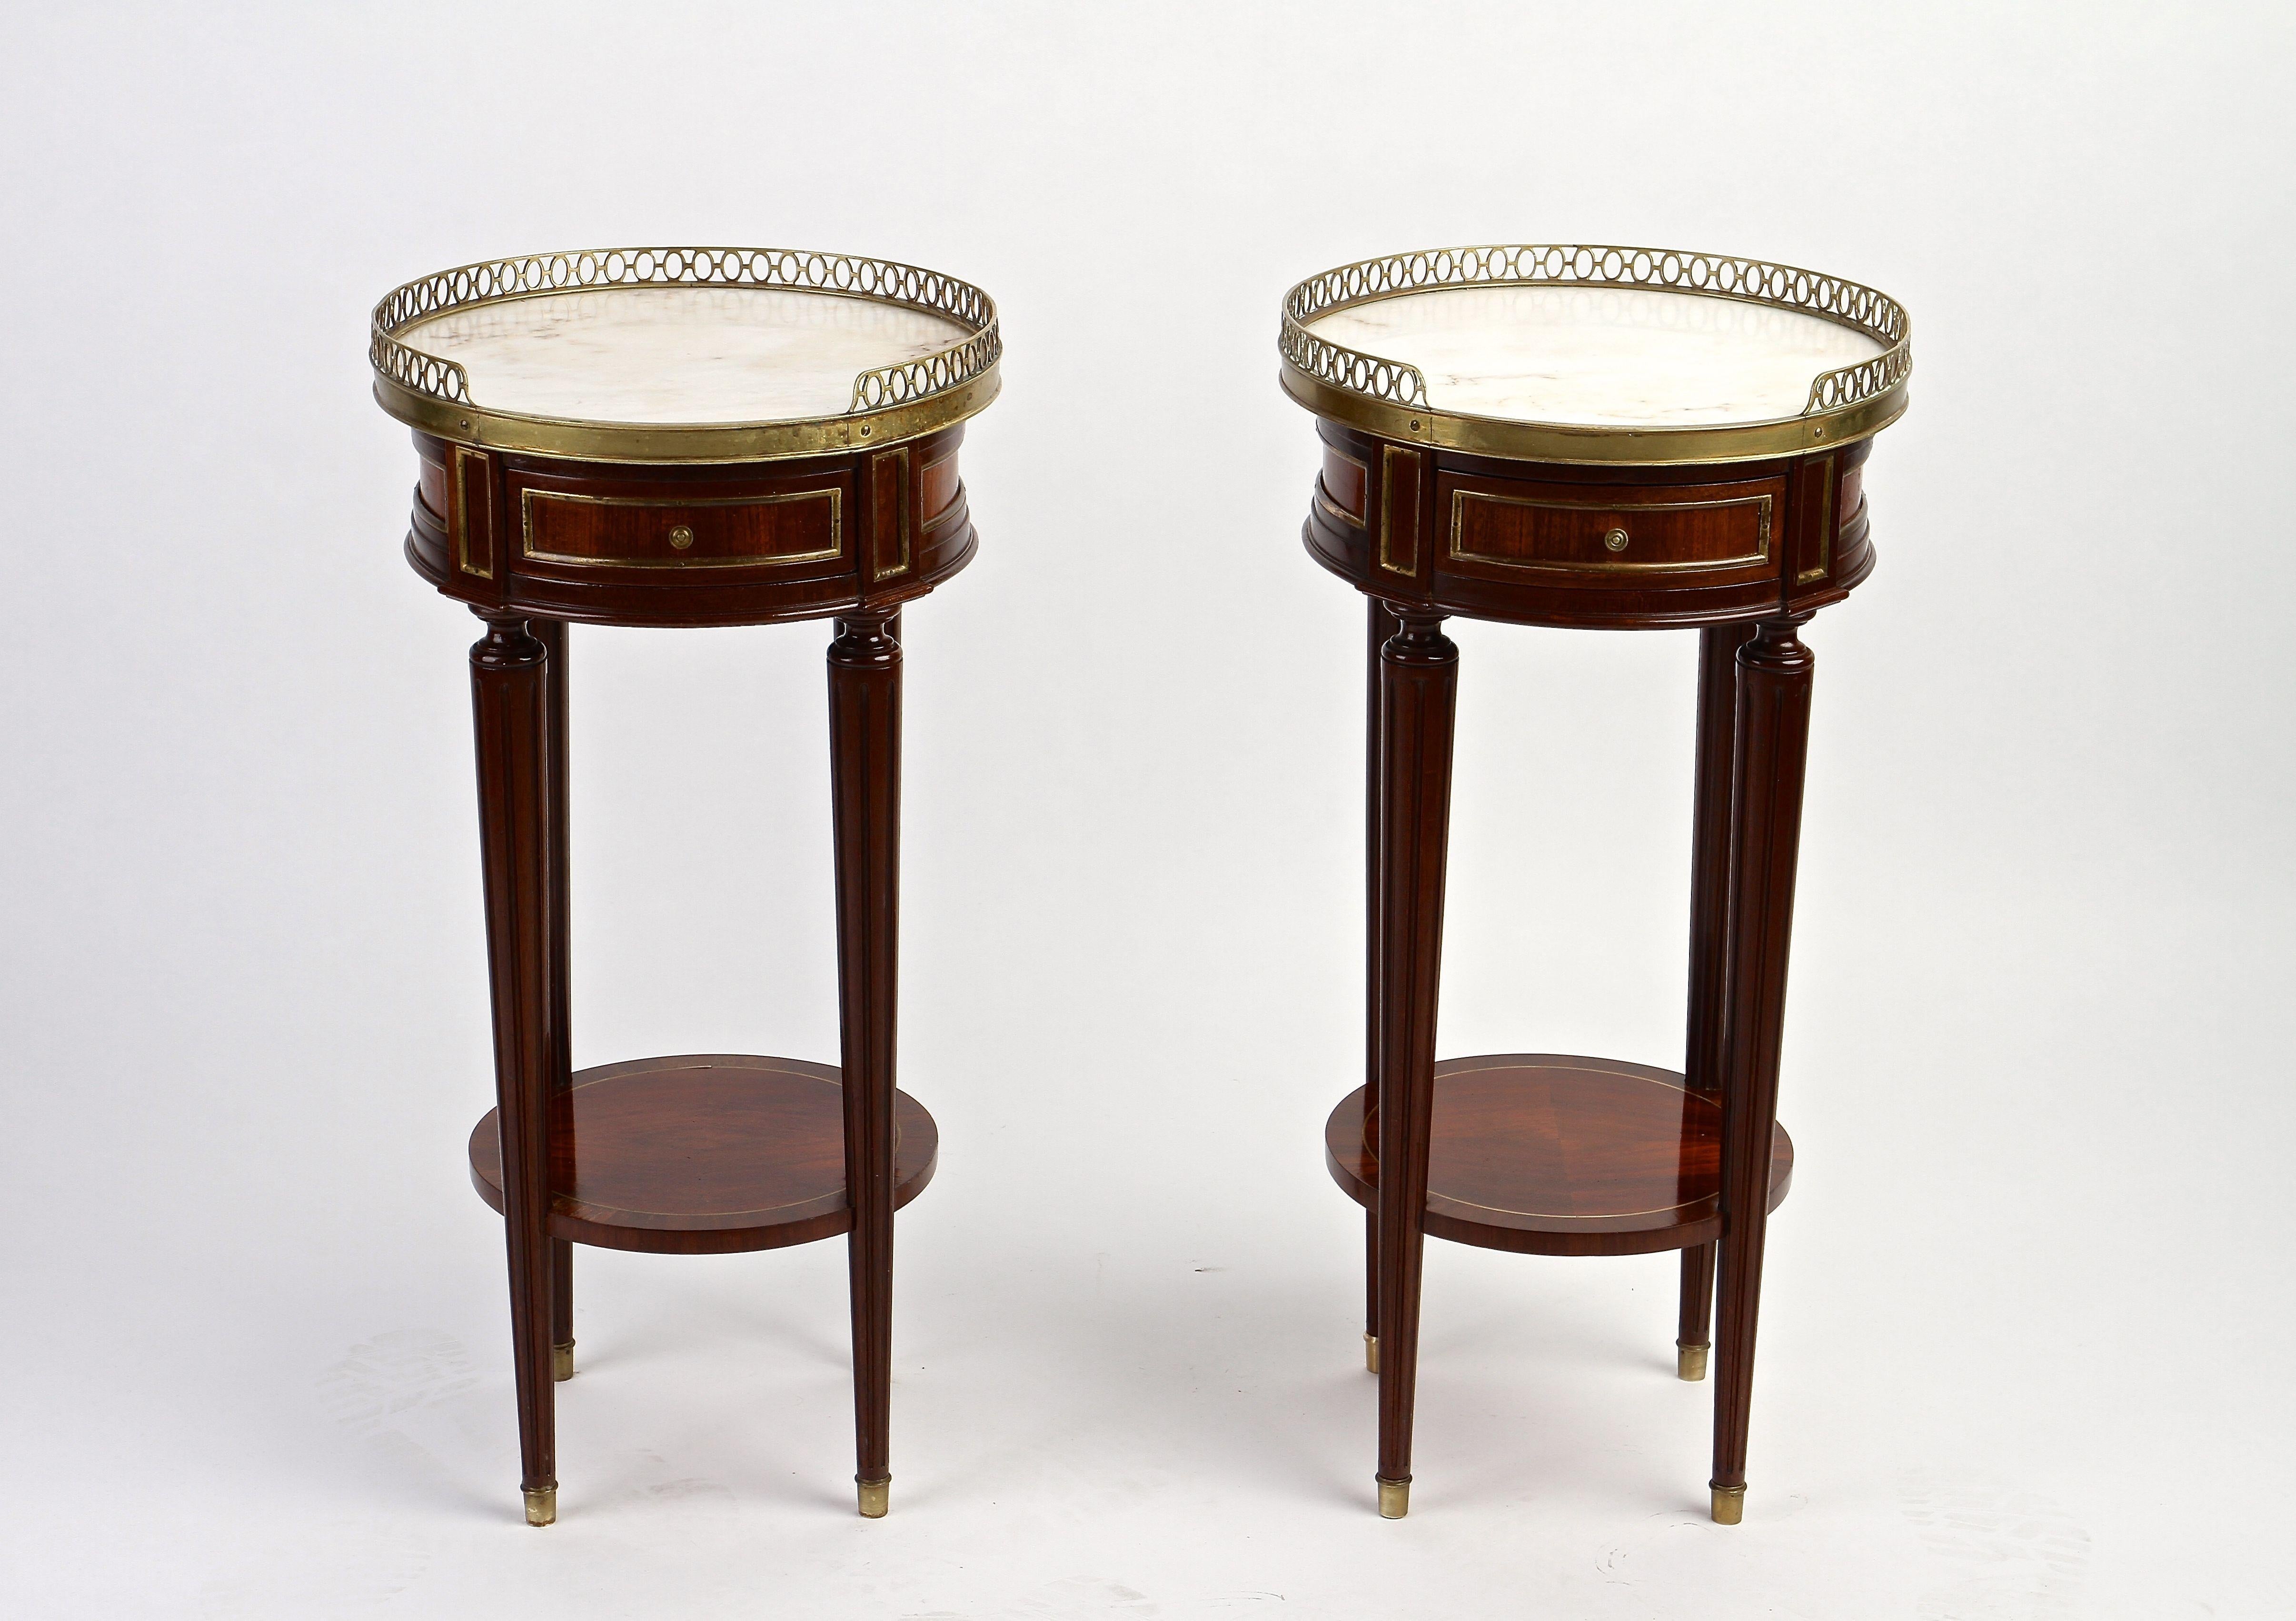 Gorgeous pair of 19th century French mahogany gueridon/ side tables from the period around 1870. Made of fine mahogany wood, these delicate round Gueridon tables show a very noble design. The lovely shaped round upper parts are adorned by slightly